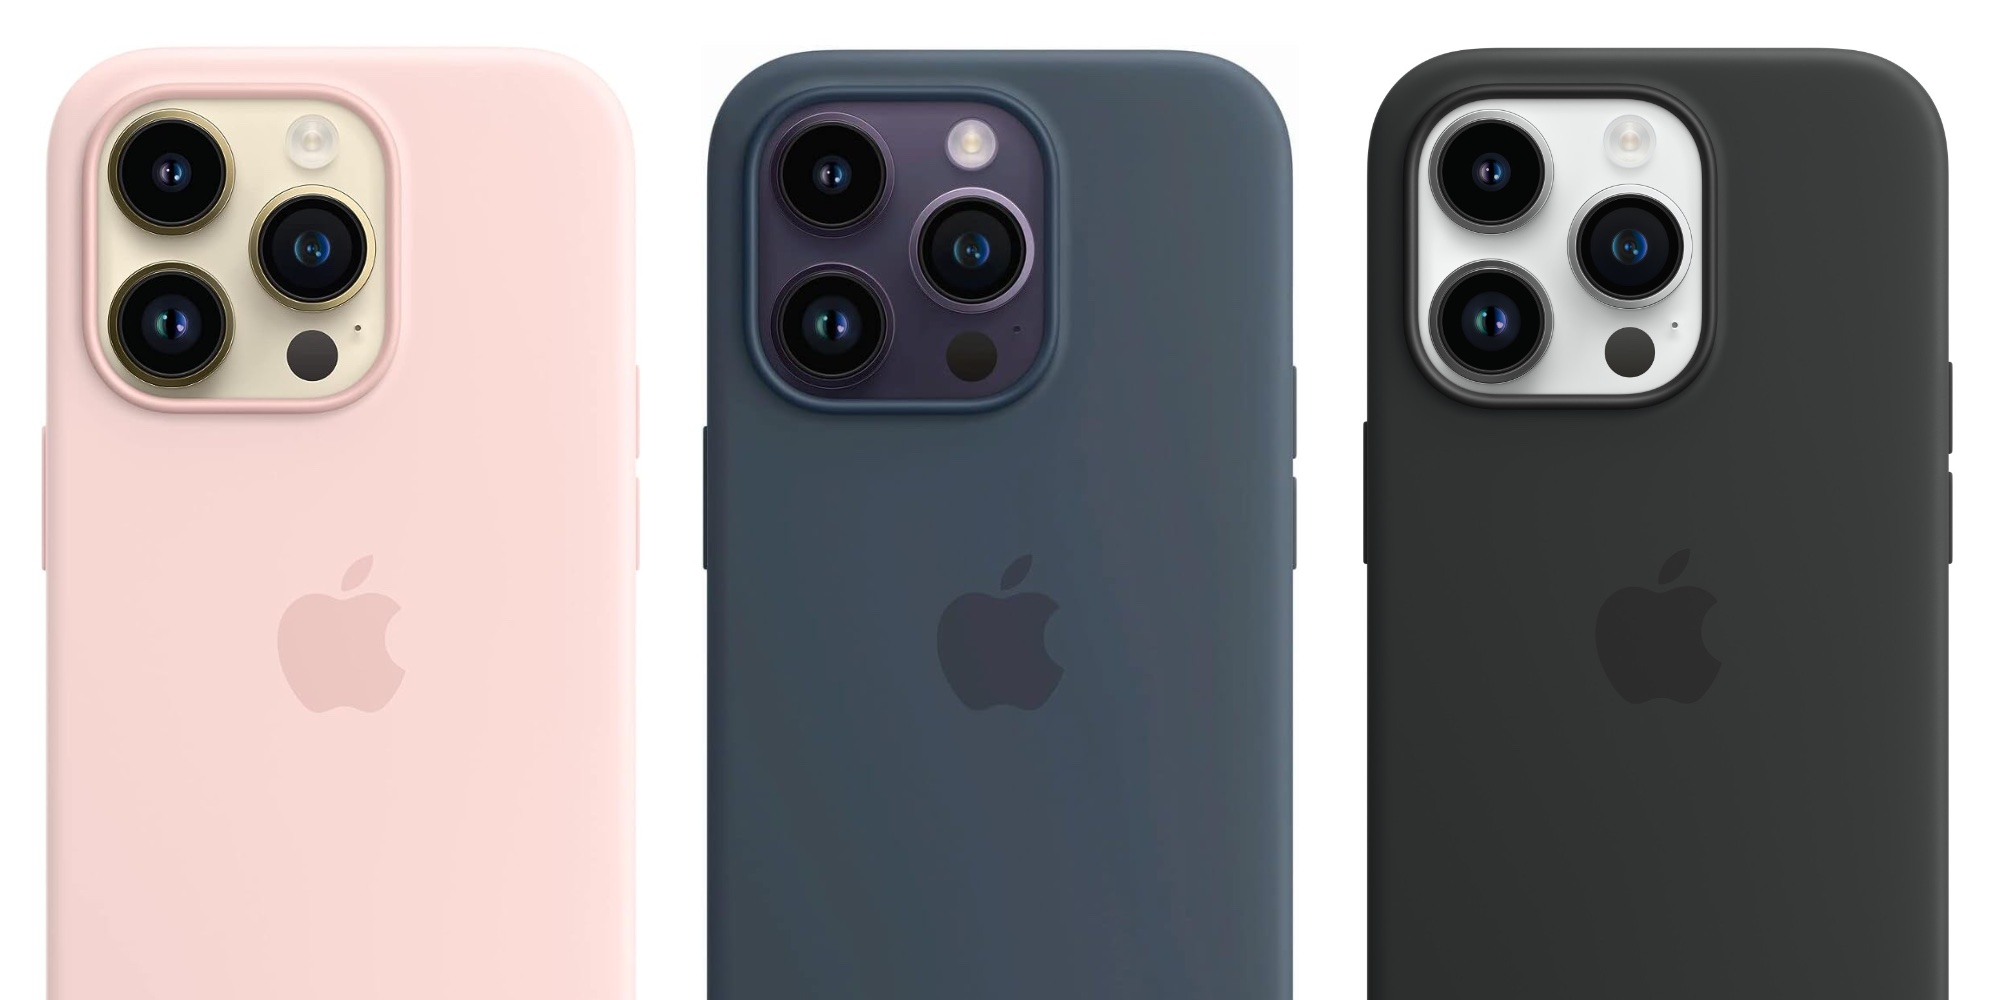 Rumor: Apple to discontinue silicone accessories, including iPhone cases and Apple Watch bands